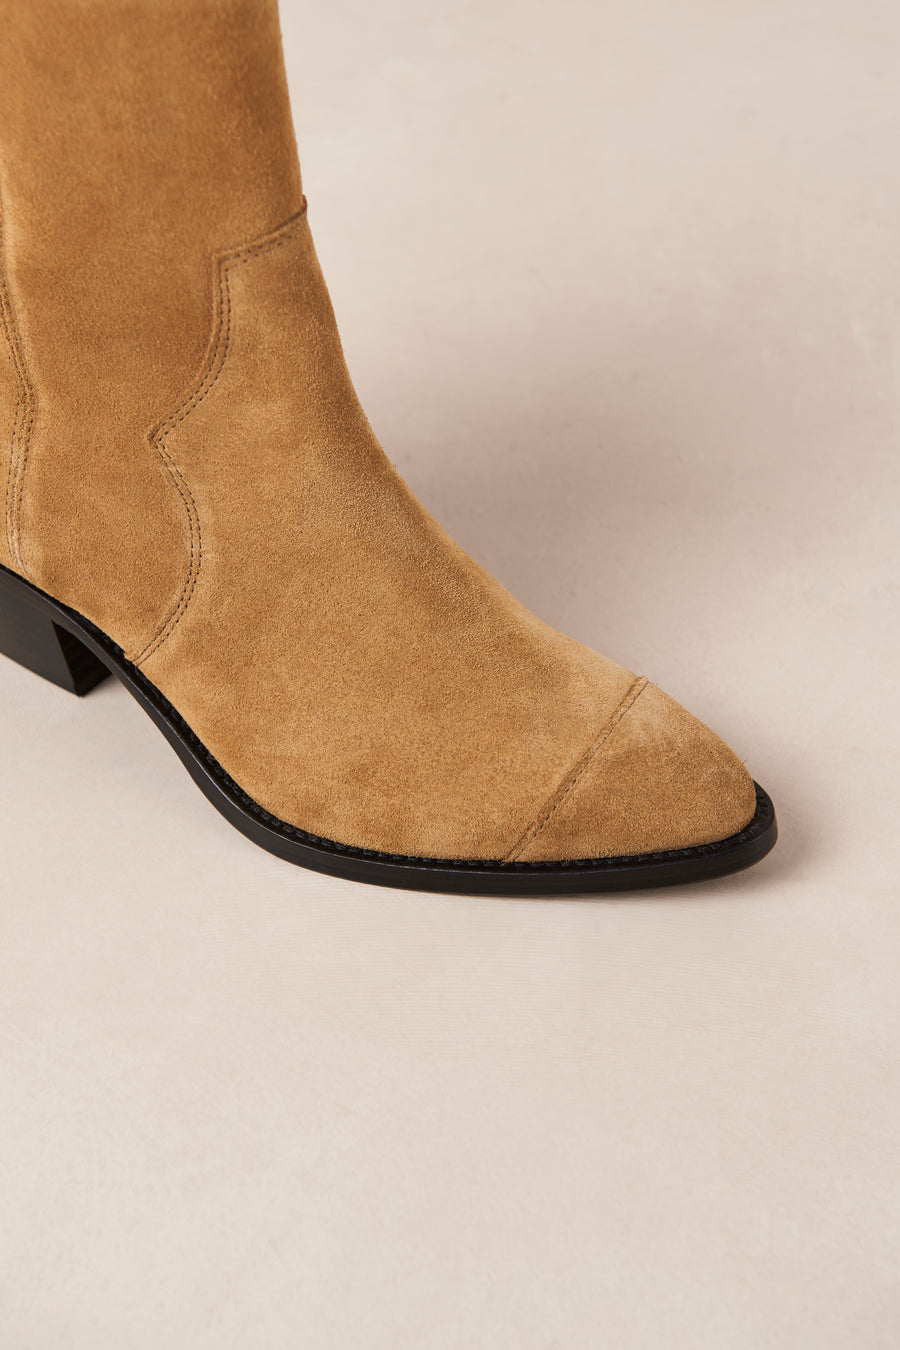 Austin Suede Tan Leather Ankle Boots